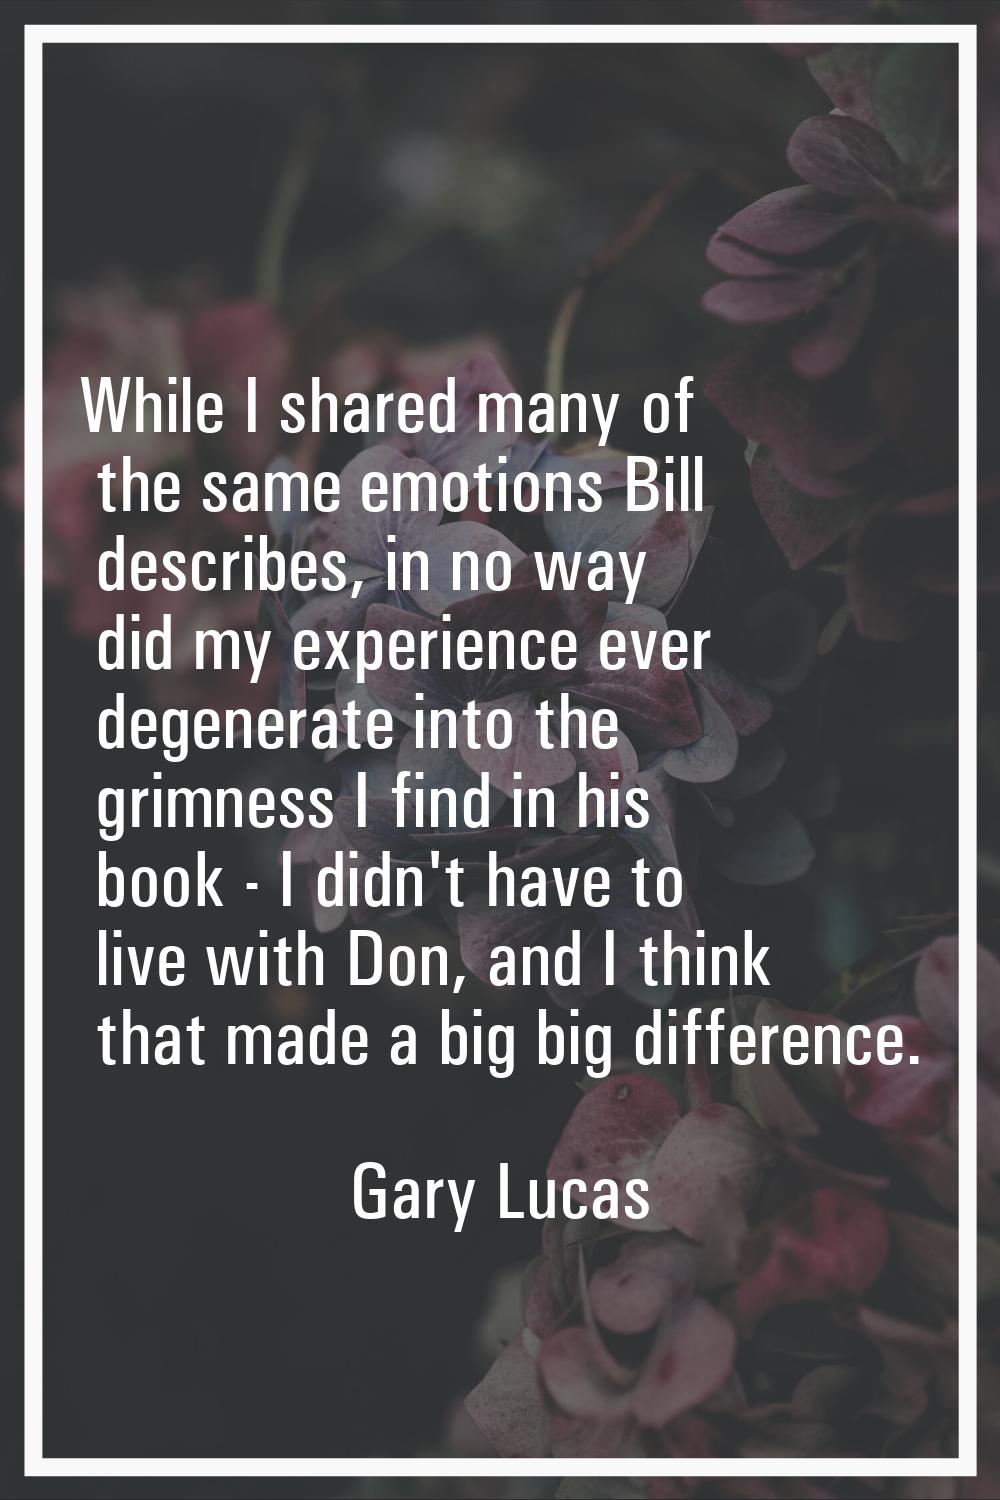 While I shared many of the same emotions Bill describes, in no way did my experience ever degenerat